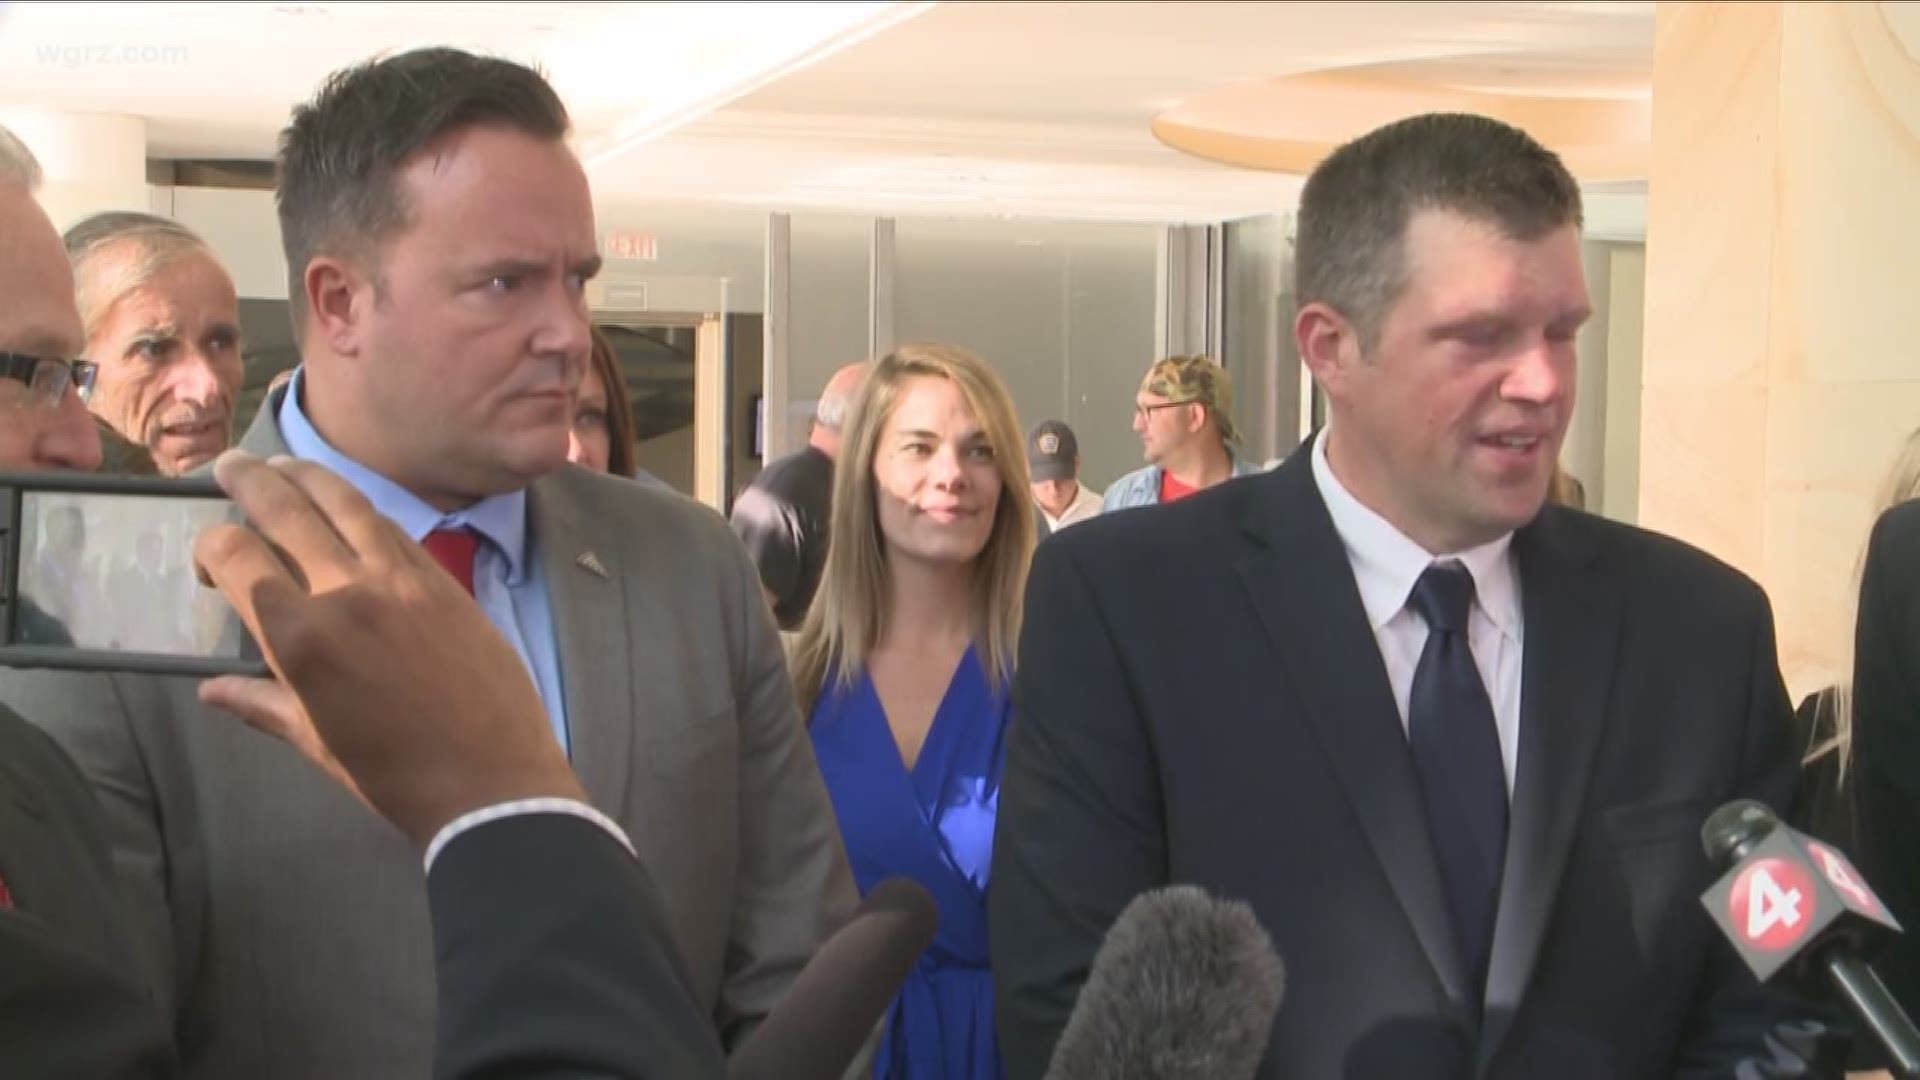 Not Guilty verdict for two Buffalo officers